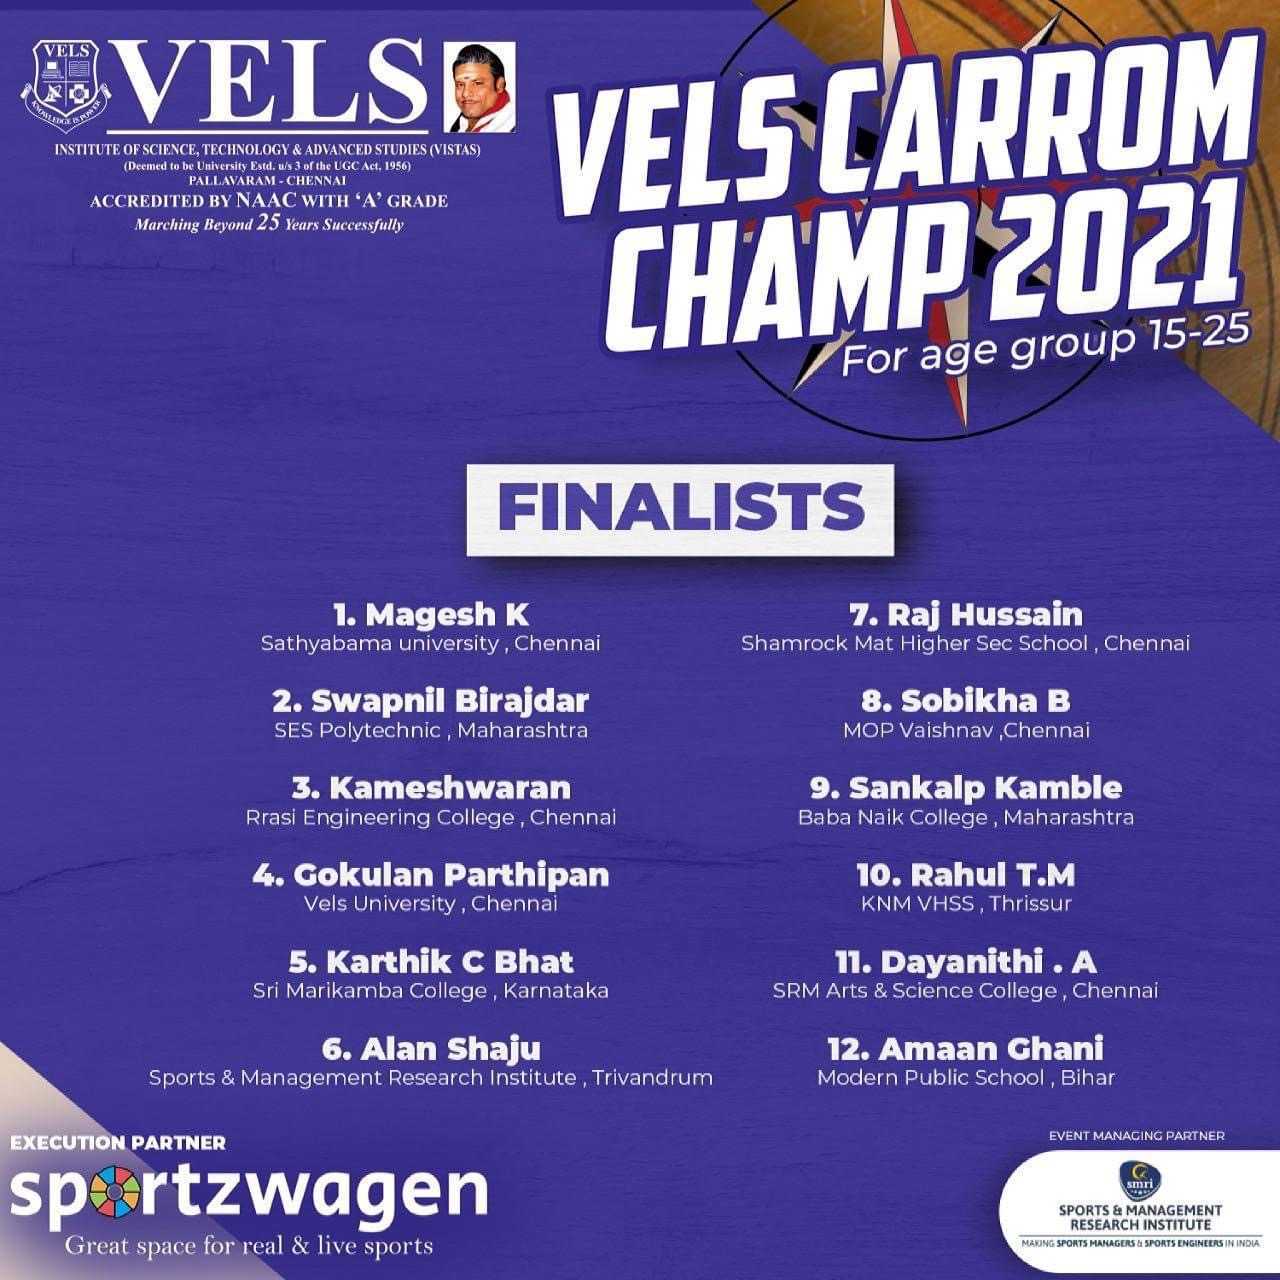 Vels carrom champ 2021 An online speed carrom competition